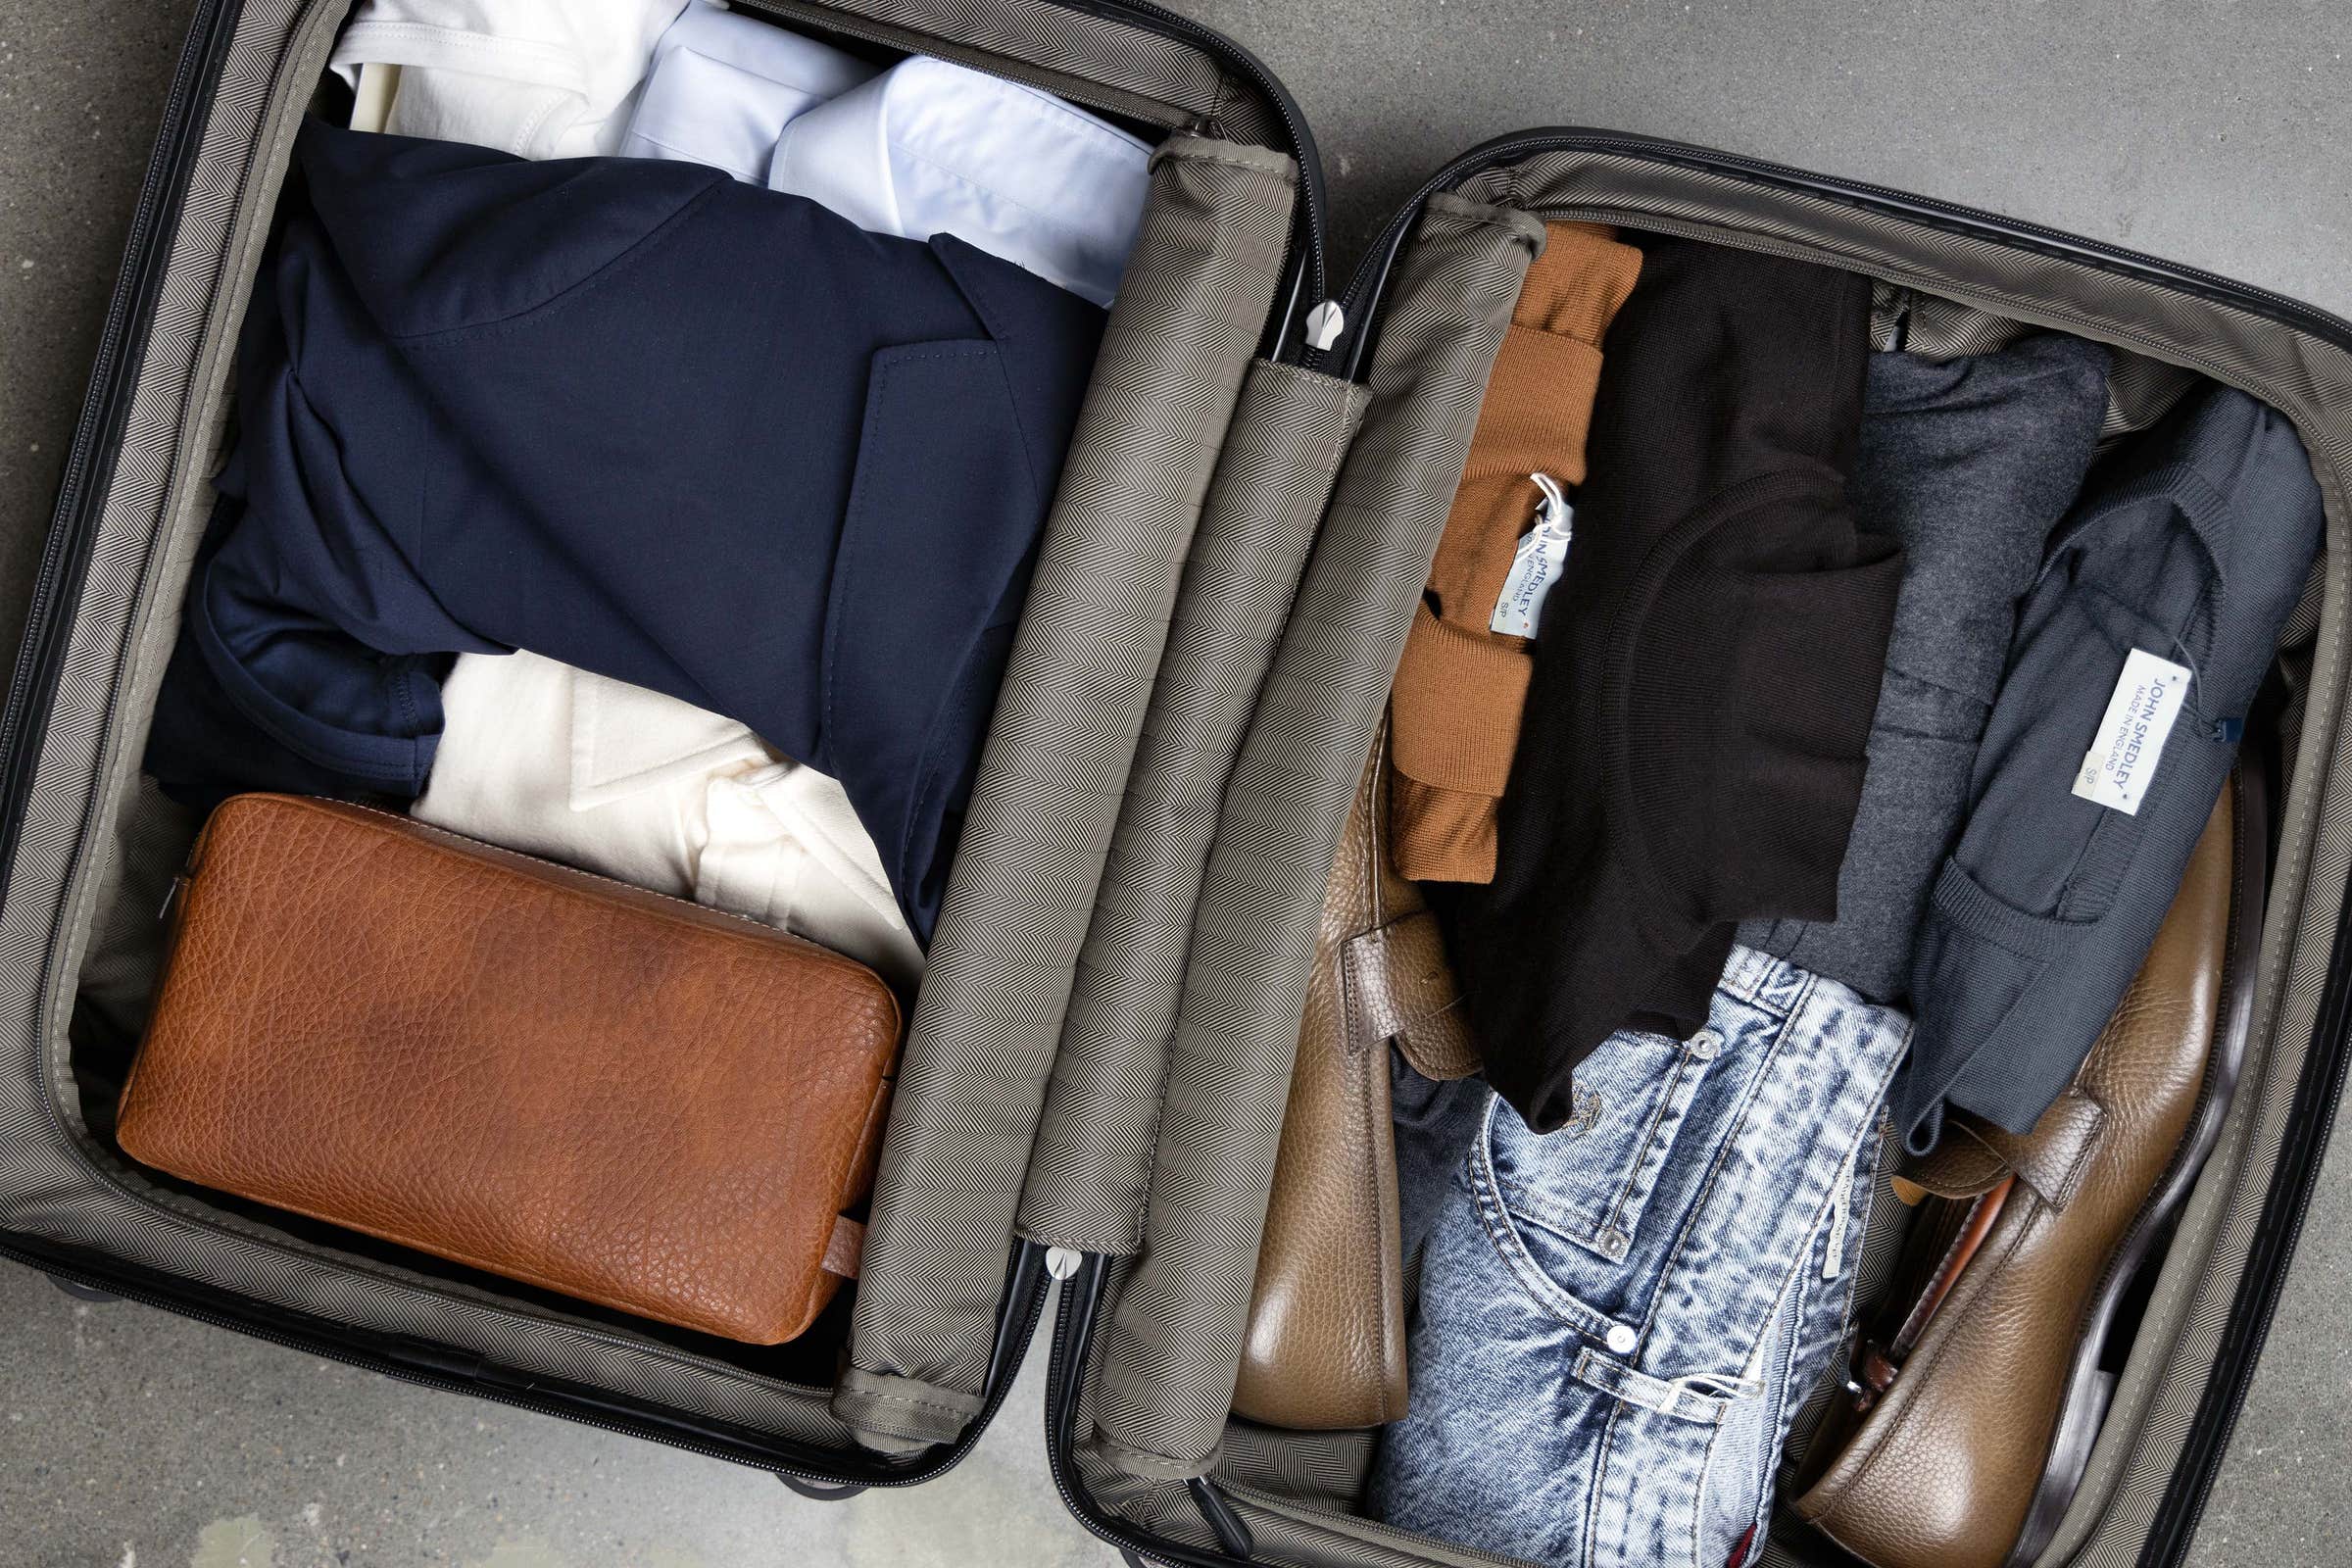 Packing Light: Your Guide to Packing the Best Carry-On